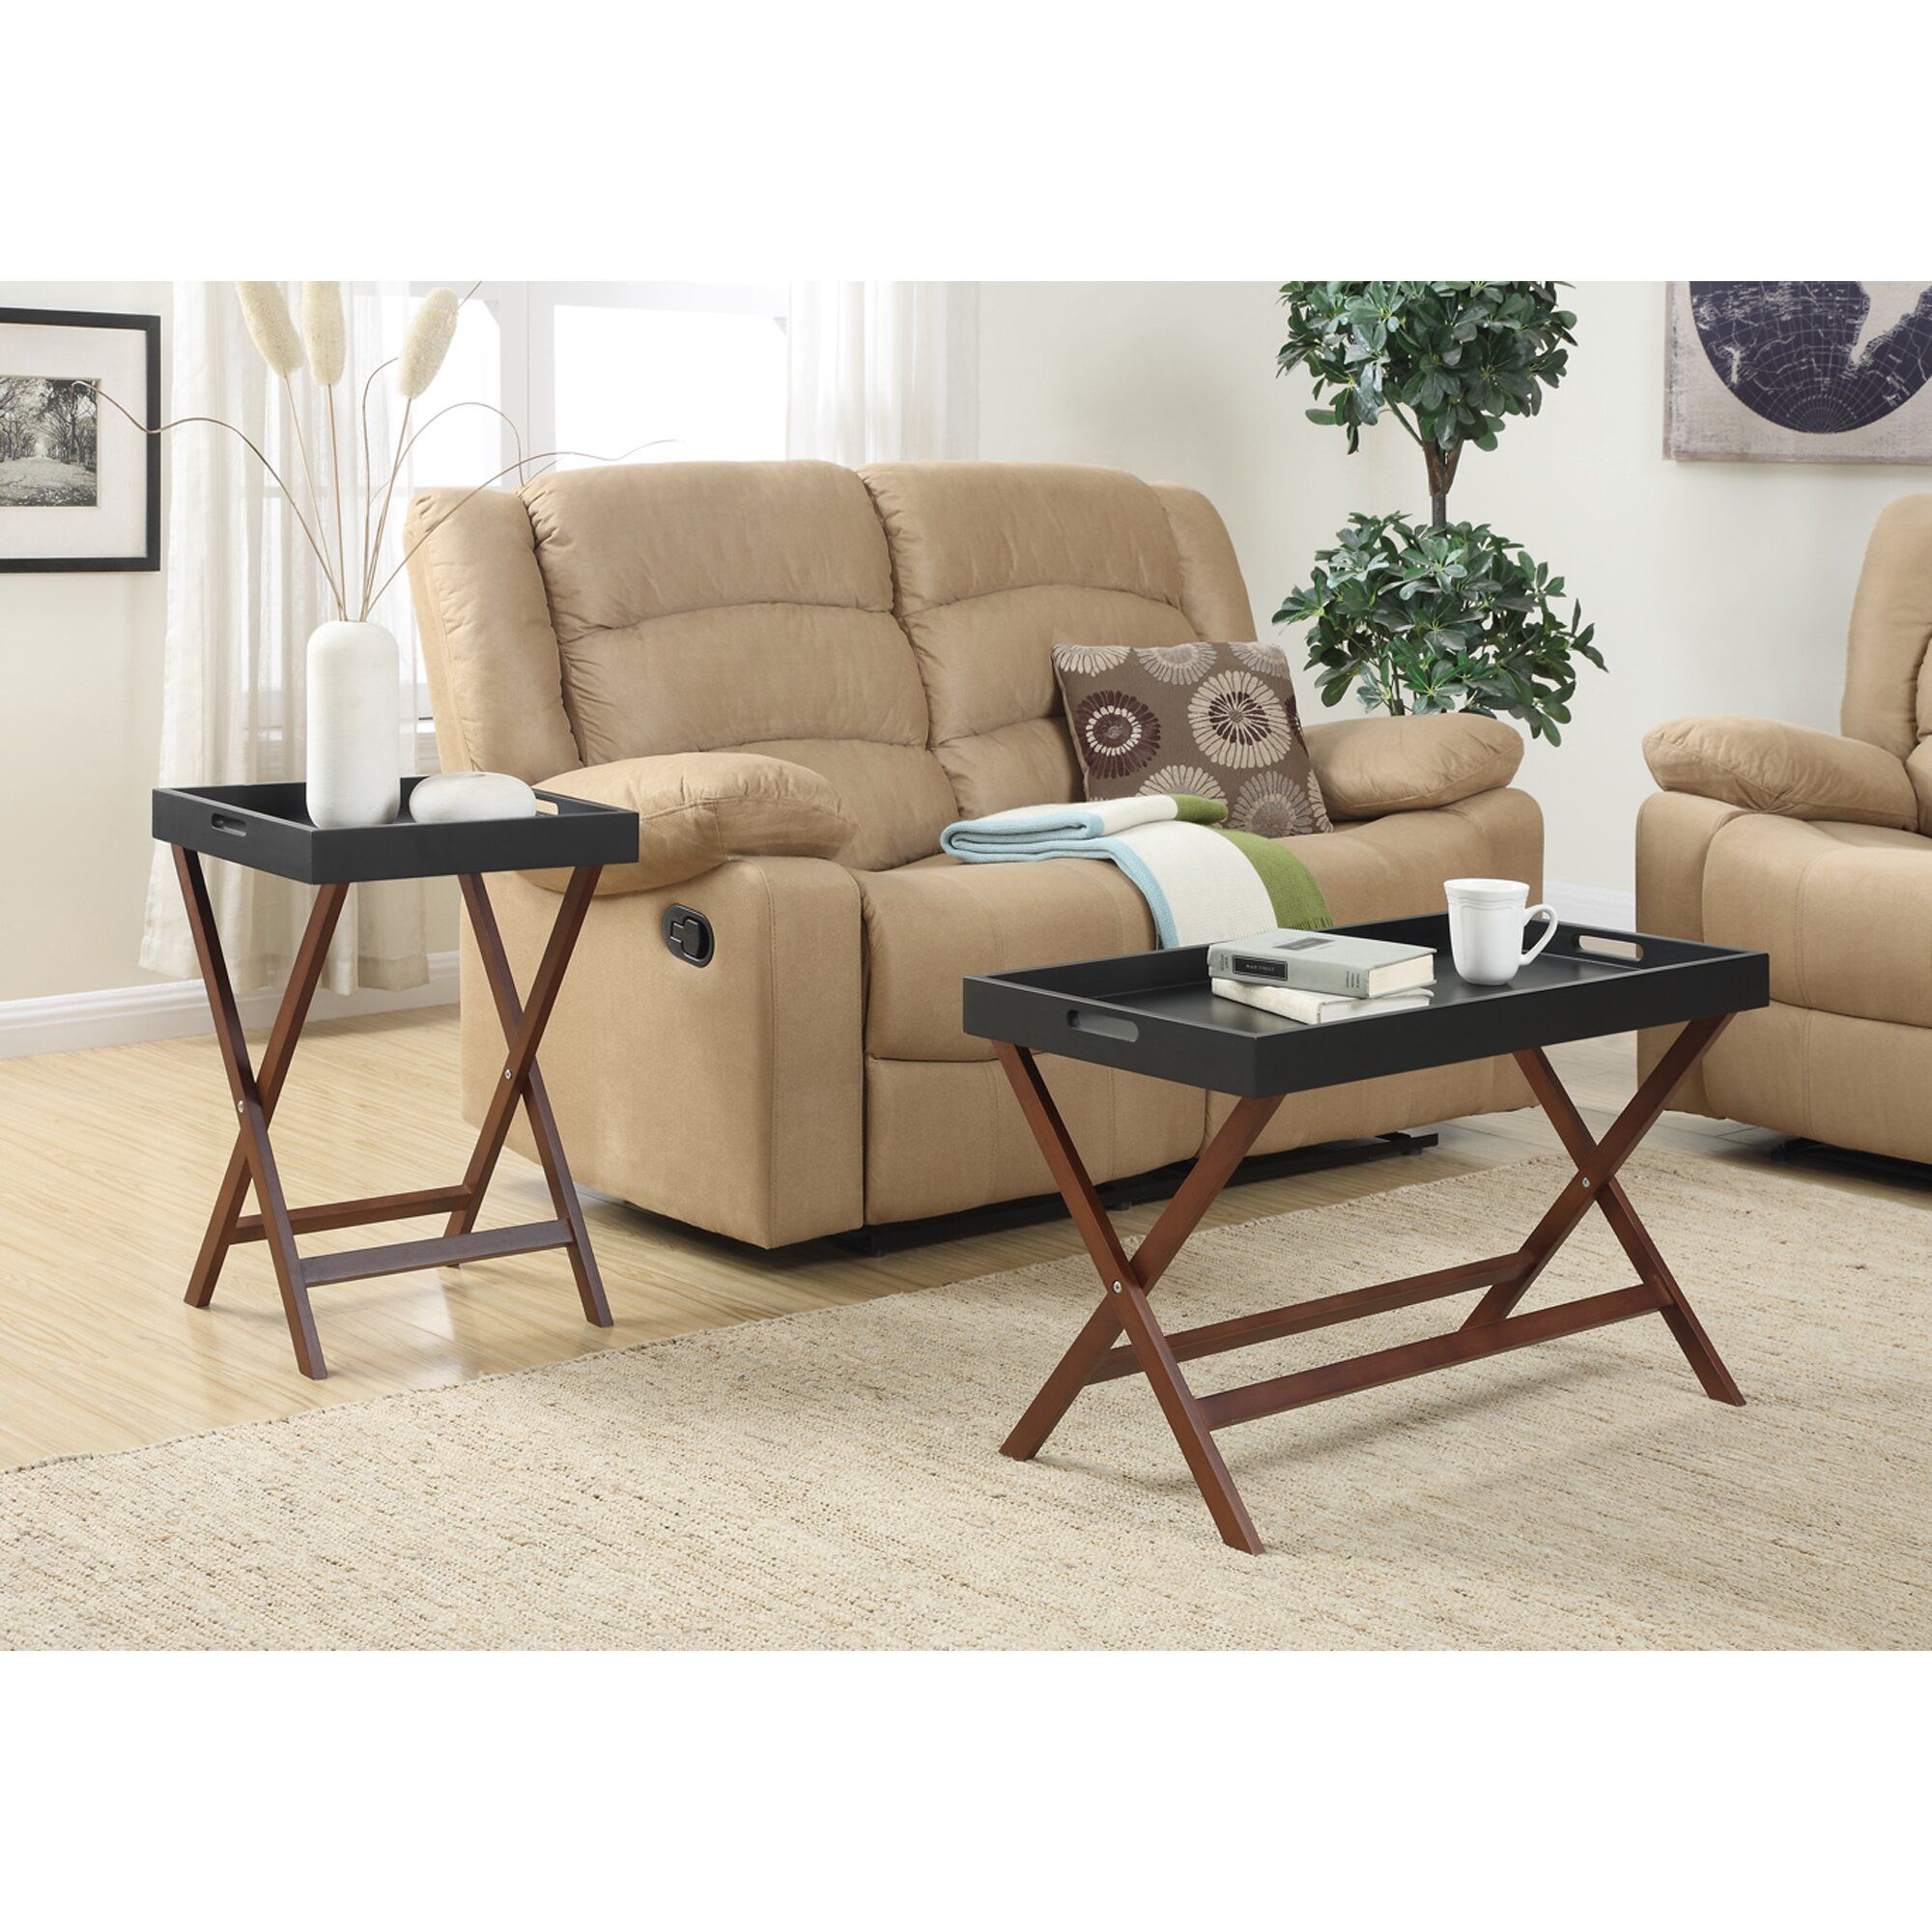 Lockheart Coffee Table With Removable Tray | Wayfair Intended For Detachable Tray Coffee Tables (View 3 of 20)